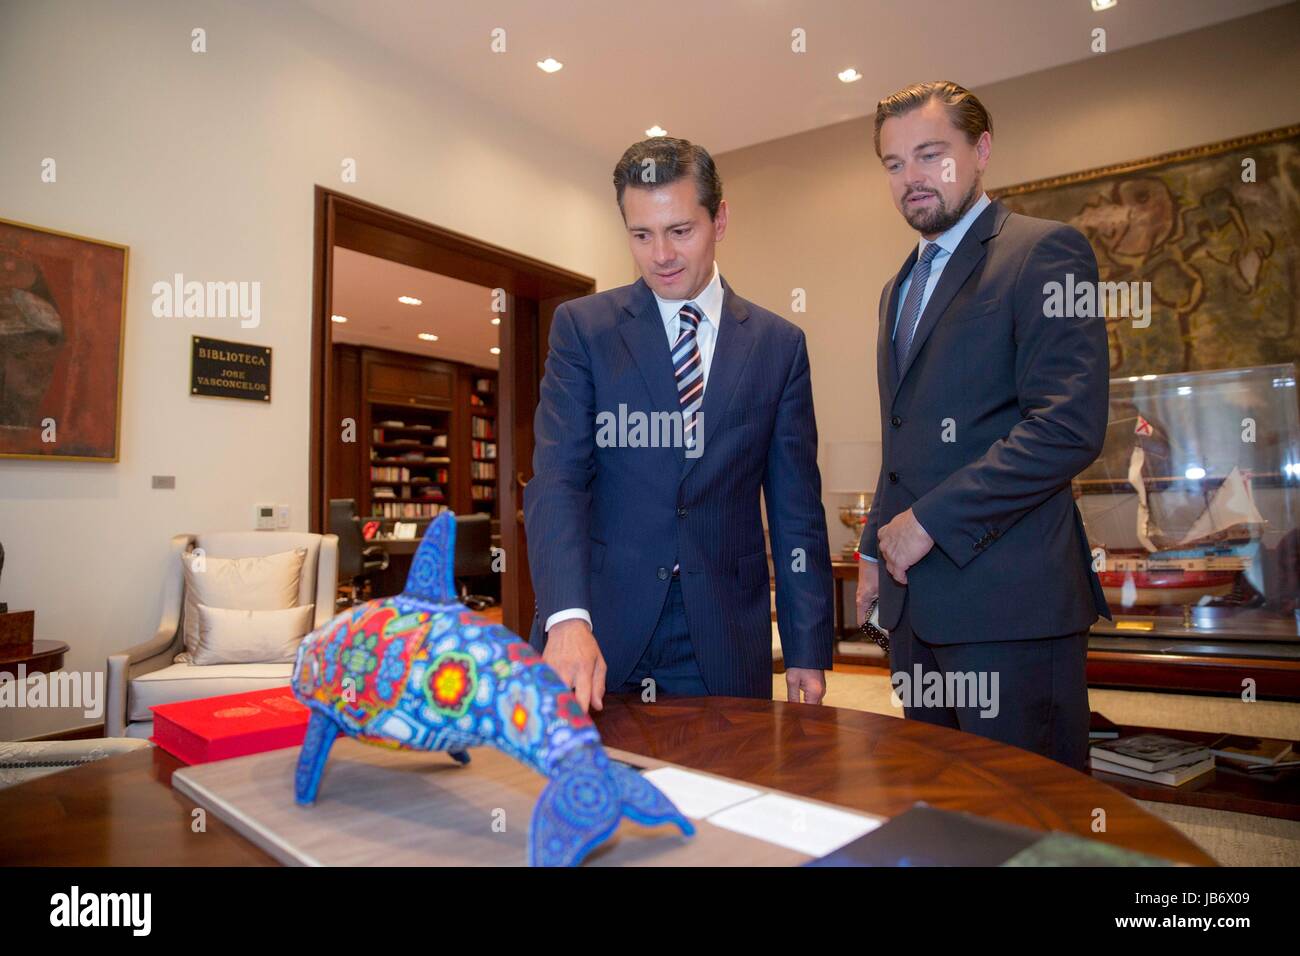 Mexico City, Mexico. 08th June, 2017. Mexican President Enrique Pena Nieto, left, and actor Leonardo DiCaprio view a folk sculpture of the Vaquita, a critically endangered porpoise native to Mexico's Gulf of California, at the presidential palace Los Pinos June 8, 2017 in Mexico City, Mexico. DiCaprio is joining forces with Pena Nieto and Mexican billionaire Carlos Slim to try and save the Vaquita from extinction. (photo by Presidenciamx via Planetpix) Stock Photo